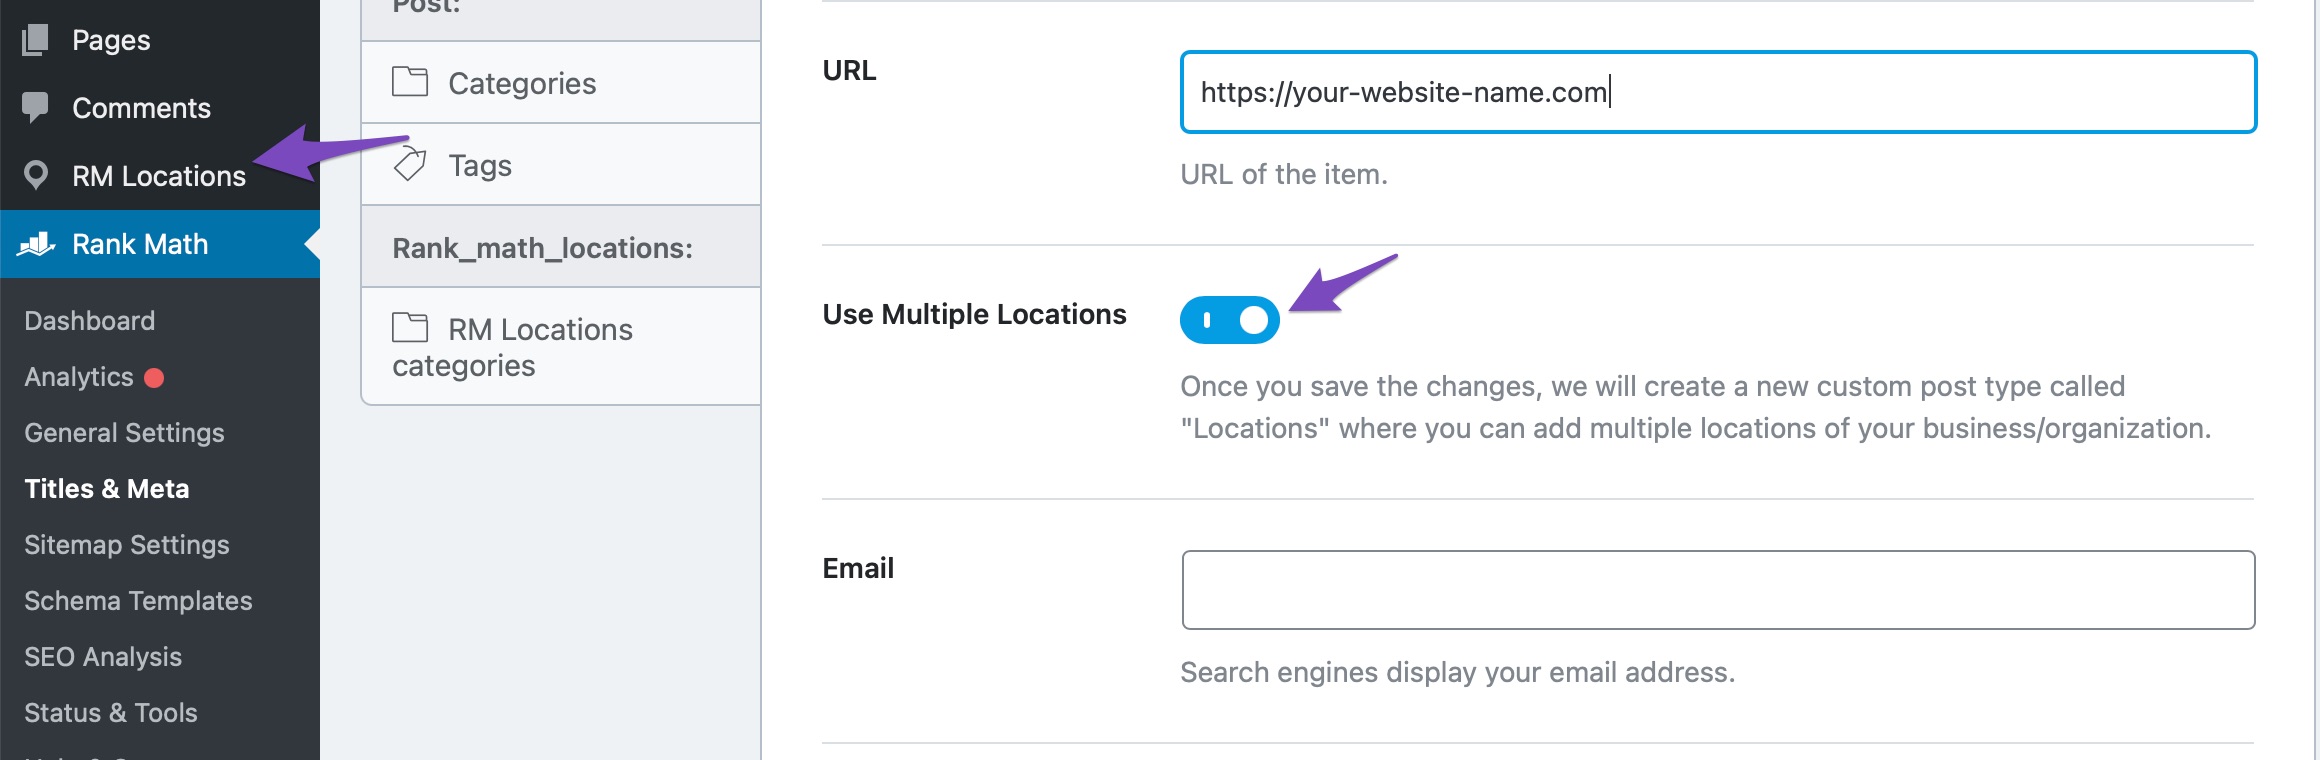 Enable Use Multiple Locations option